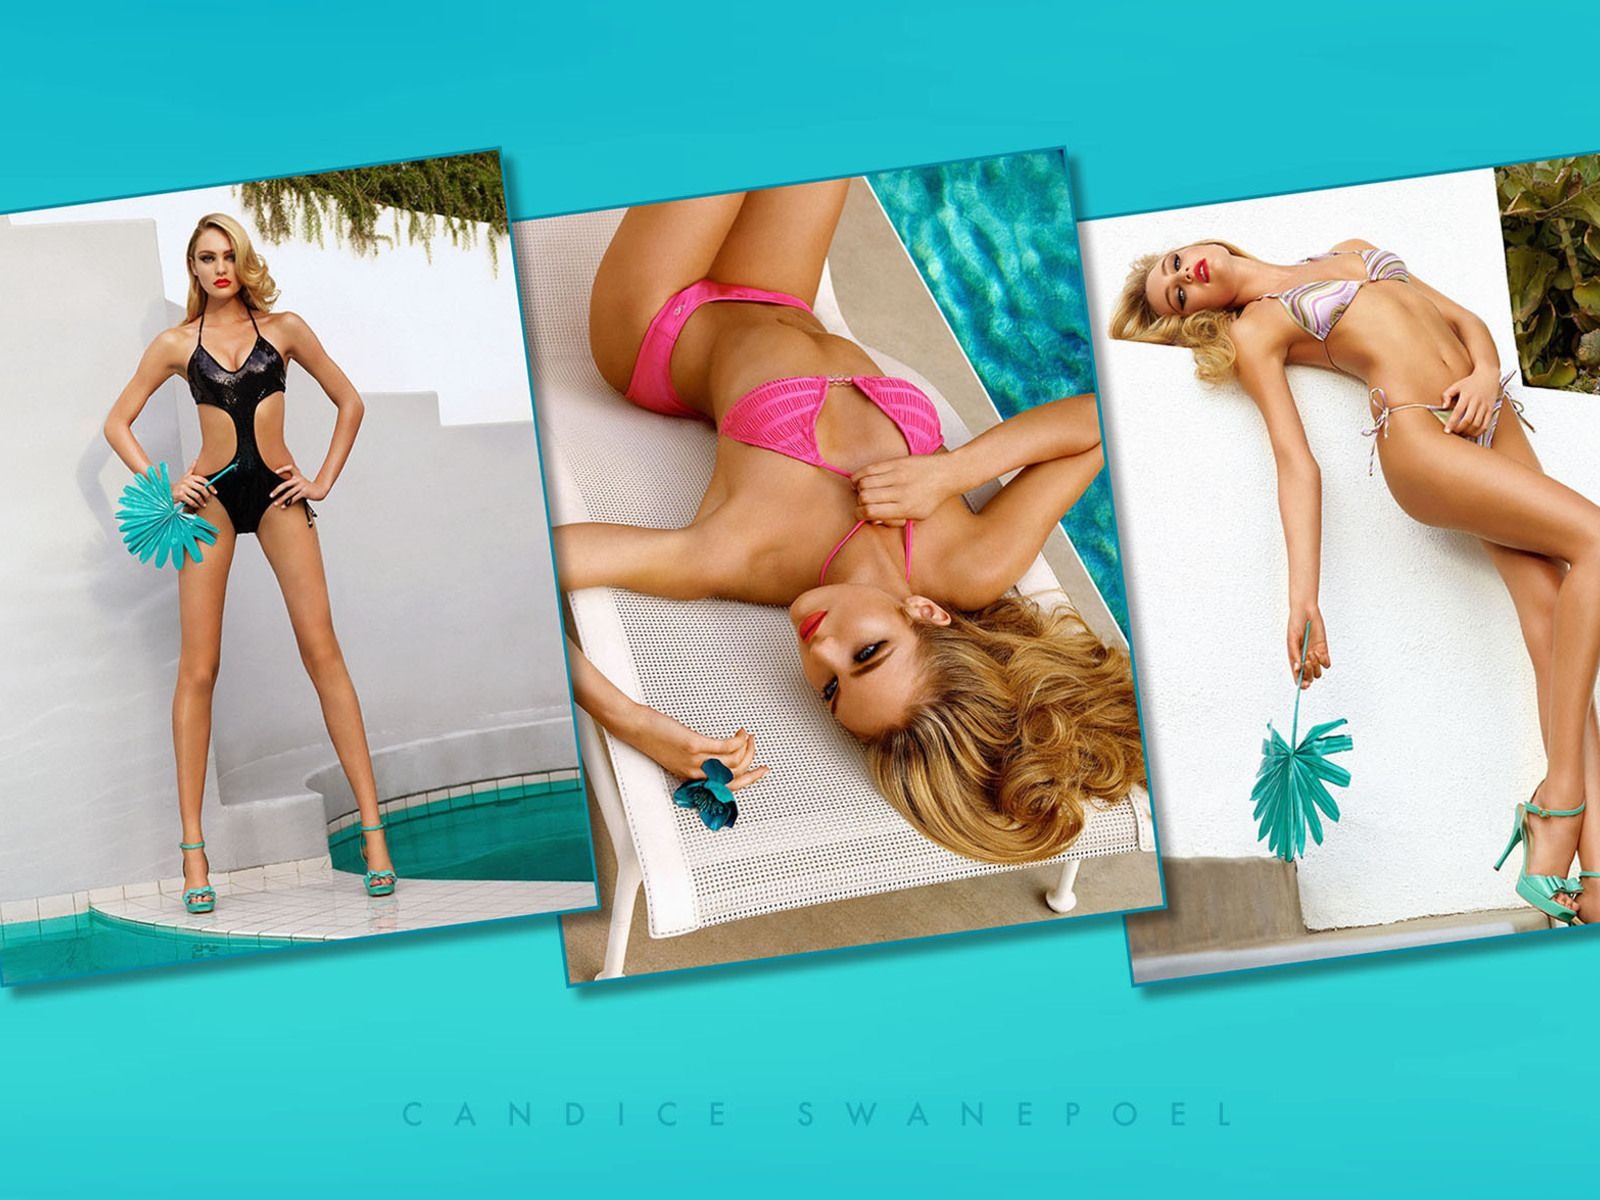 Candice Swanepoel #017 - 1600x1200 Wallpapers Pictures Photos Images